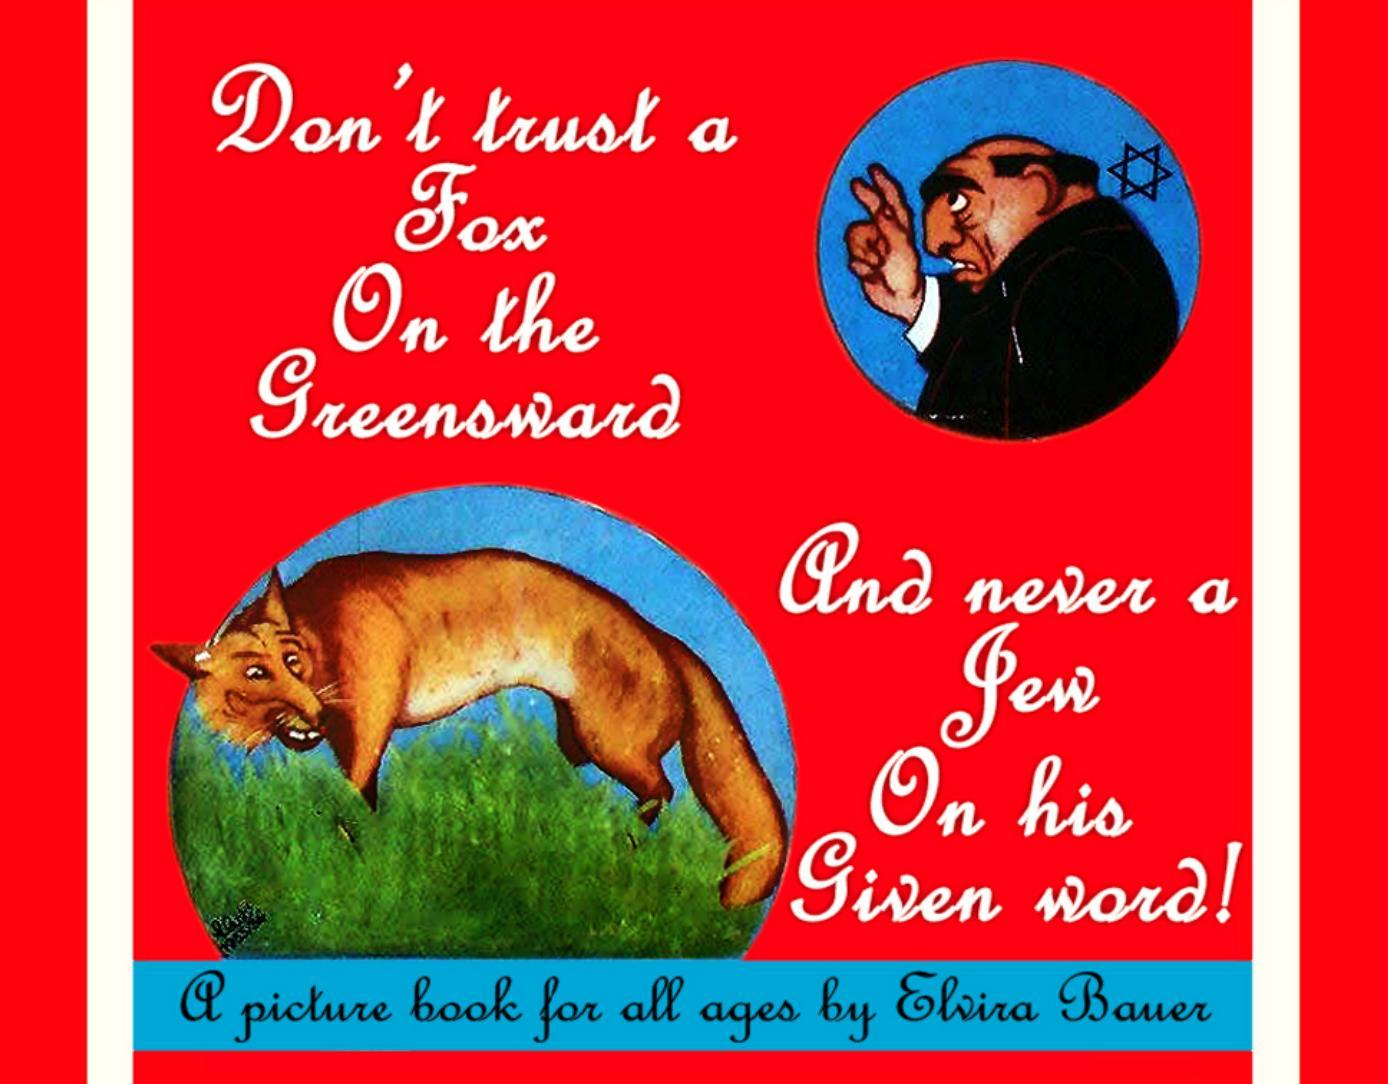 Don't trust a Fox on the Greensward and never a Jew on his given word! (1936) by Bauer Elvira